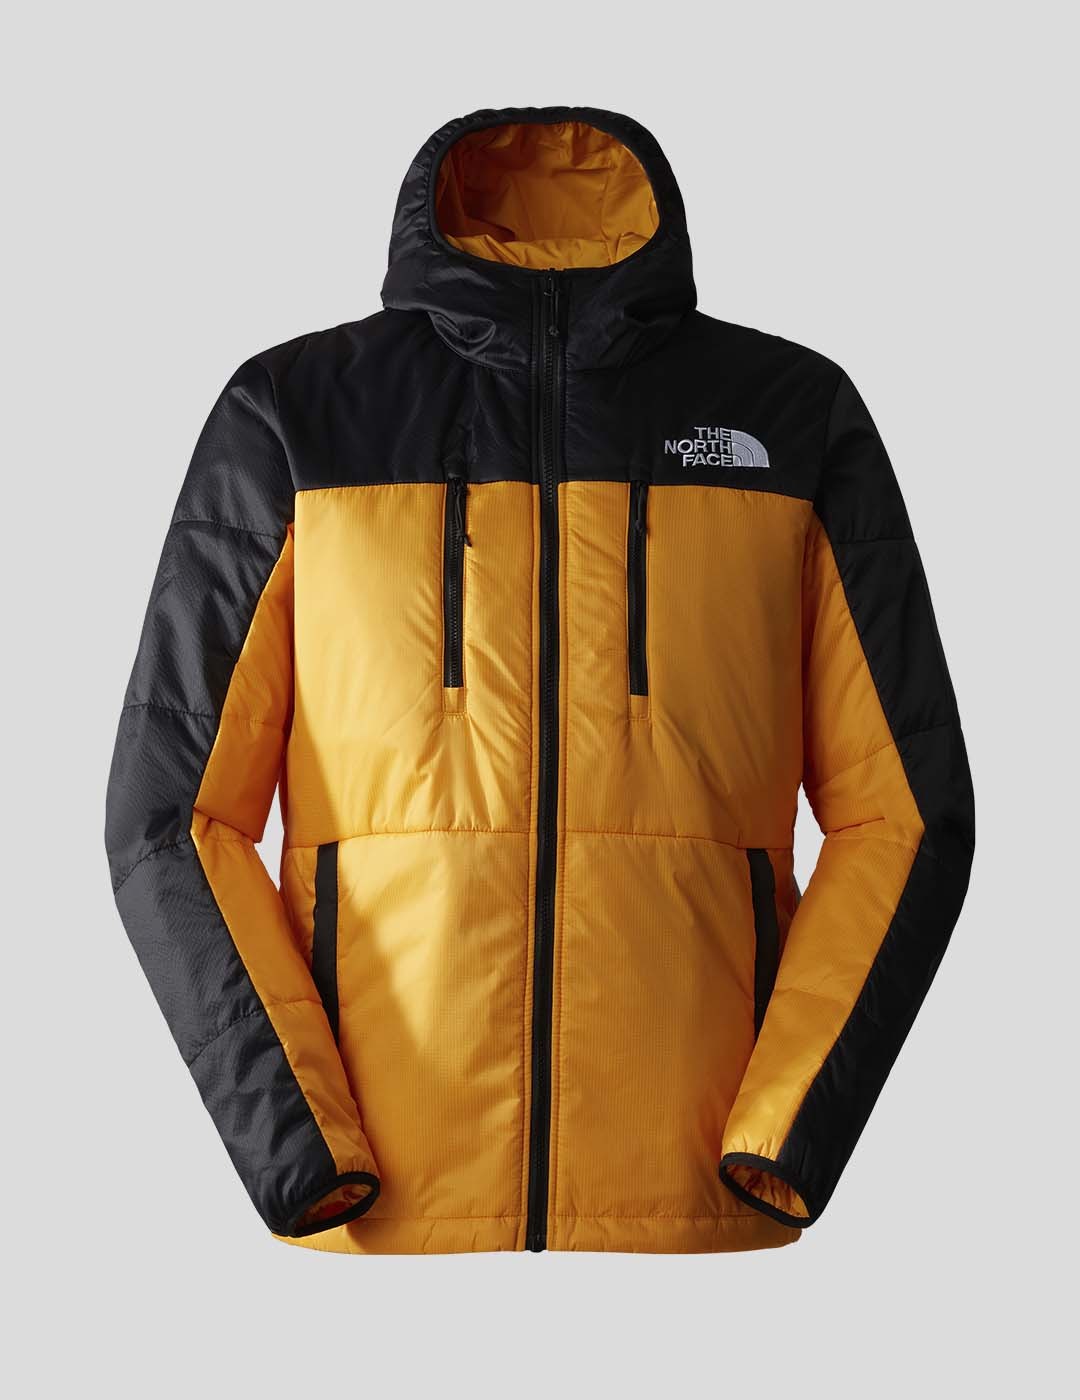 CAZADORA THE NORTH FACE HIMALAYAN LIGHT SYNTH JACKET  SUMMIT GOLD/TNF BLACK